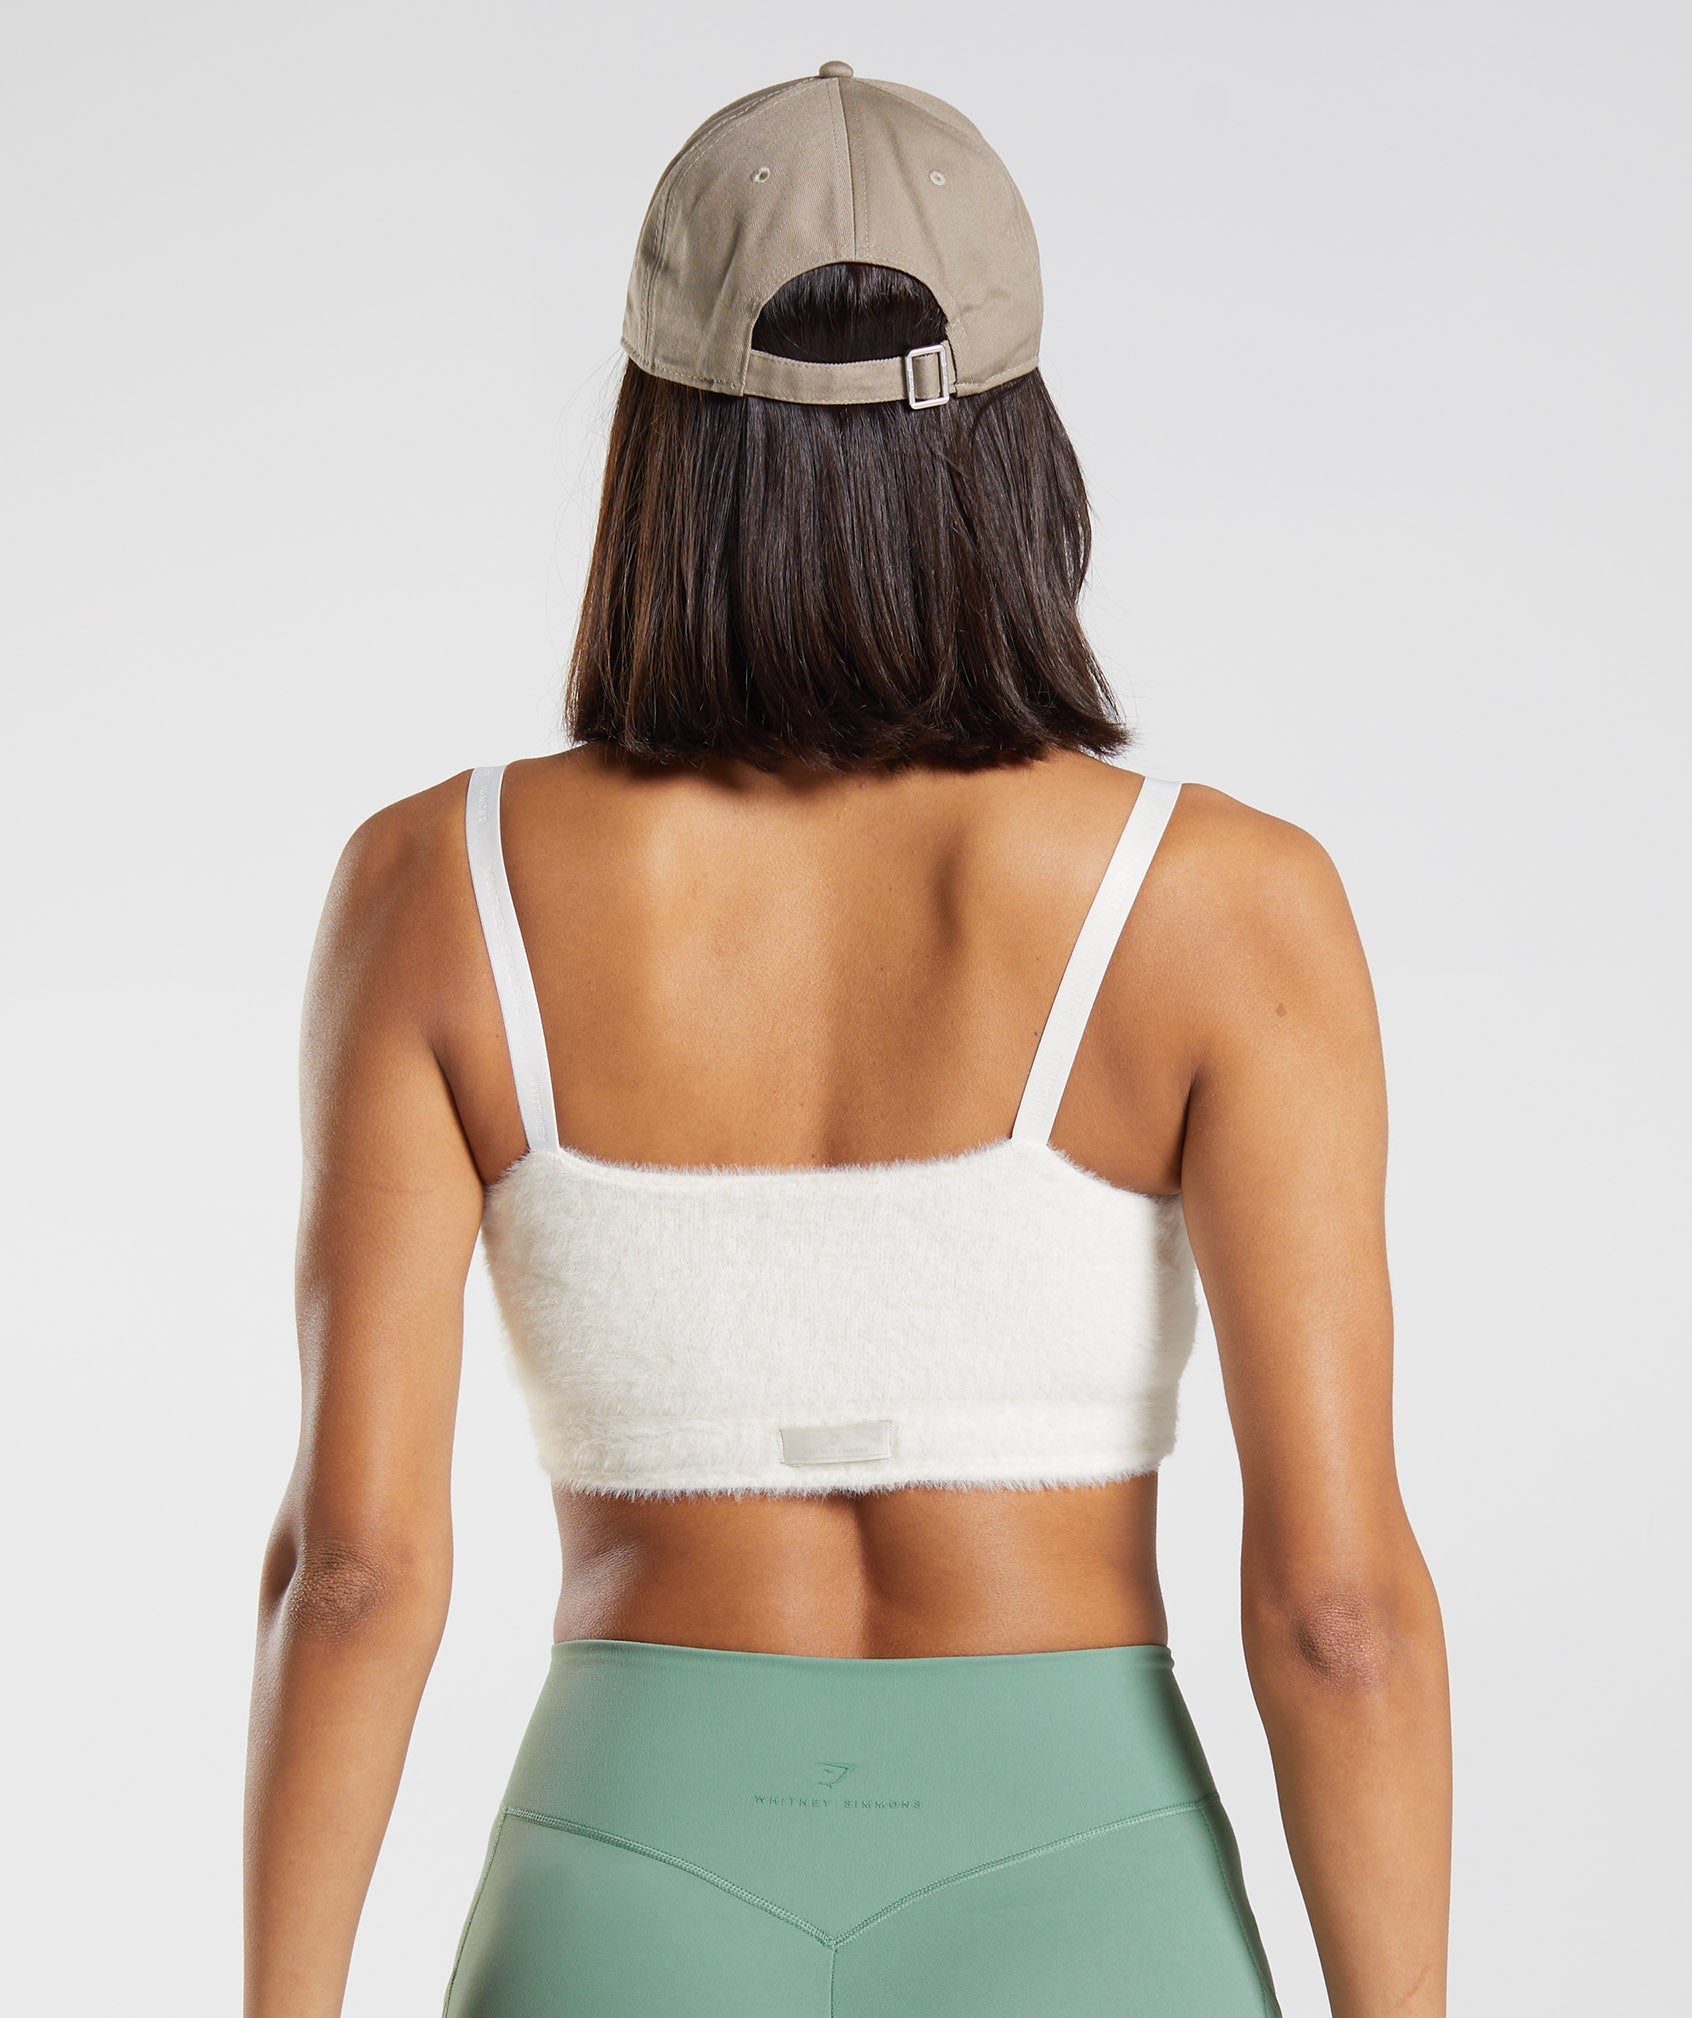 Gymshark x Whitney Simmons Collection - The Final Collection